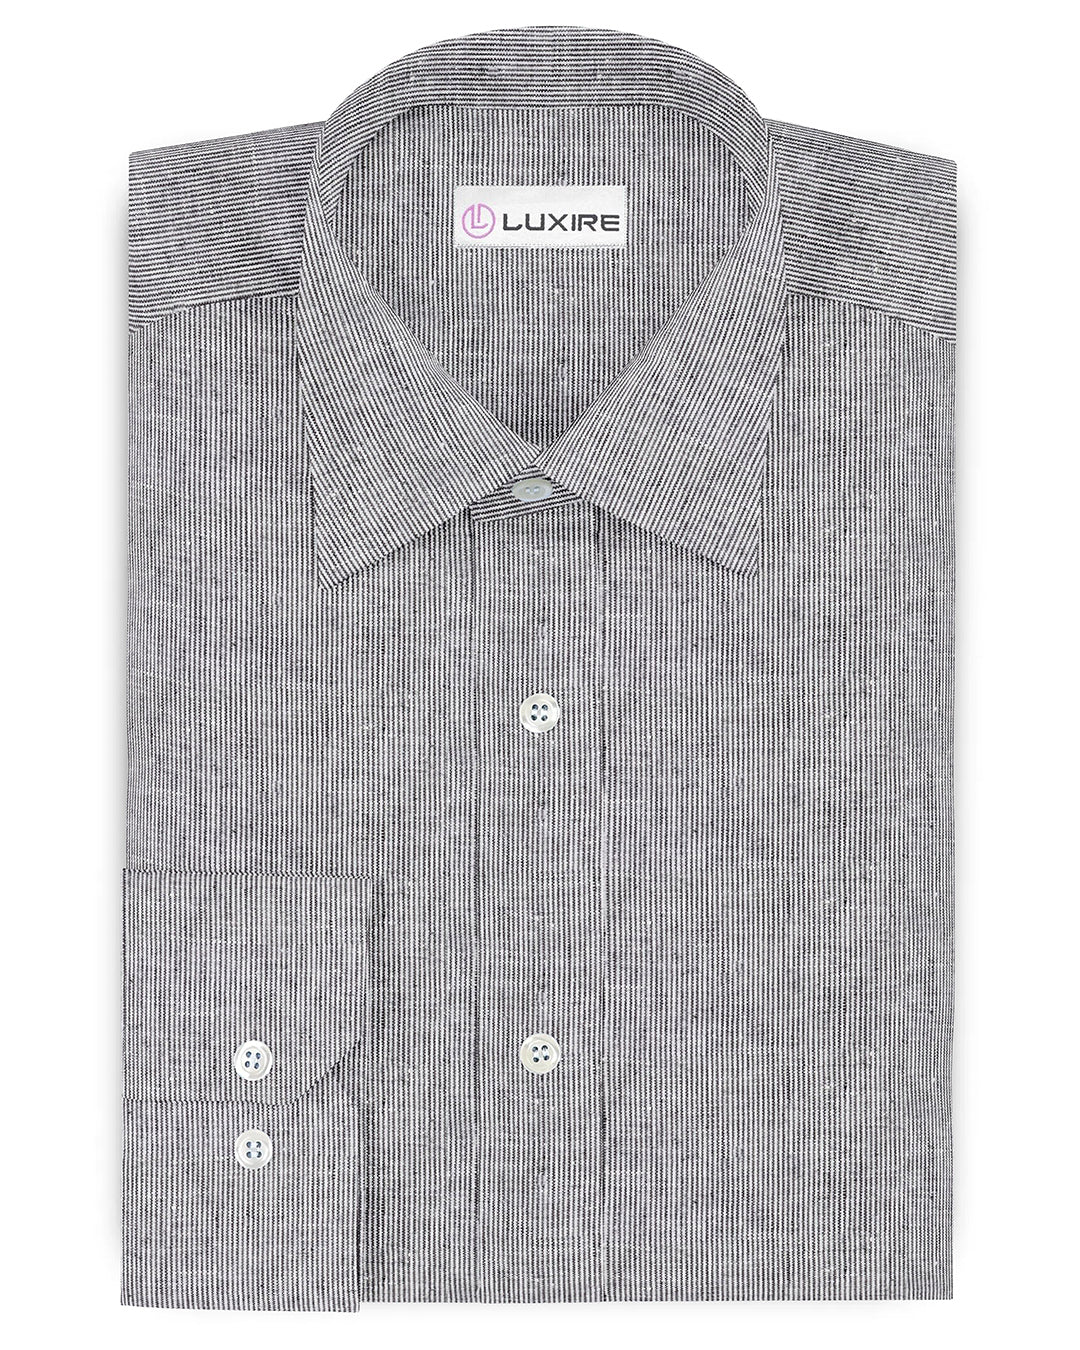 Front of the custom linen shirt for men in black and white thin stripes by Luxire Clothing